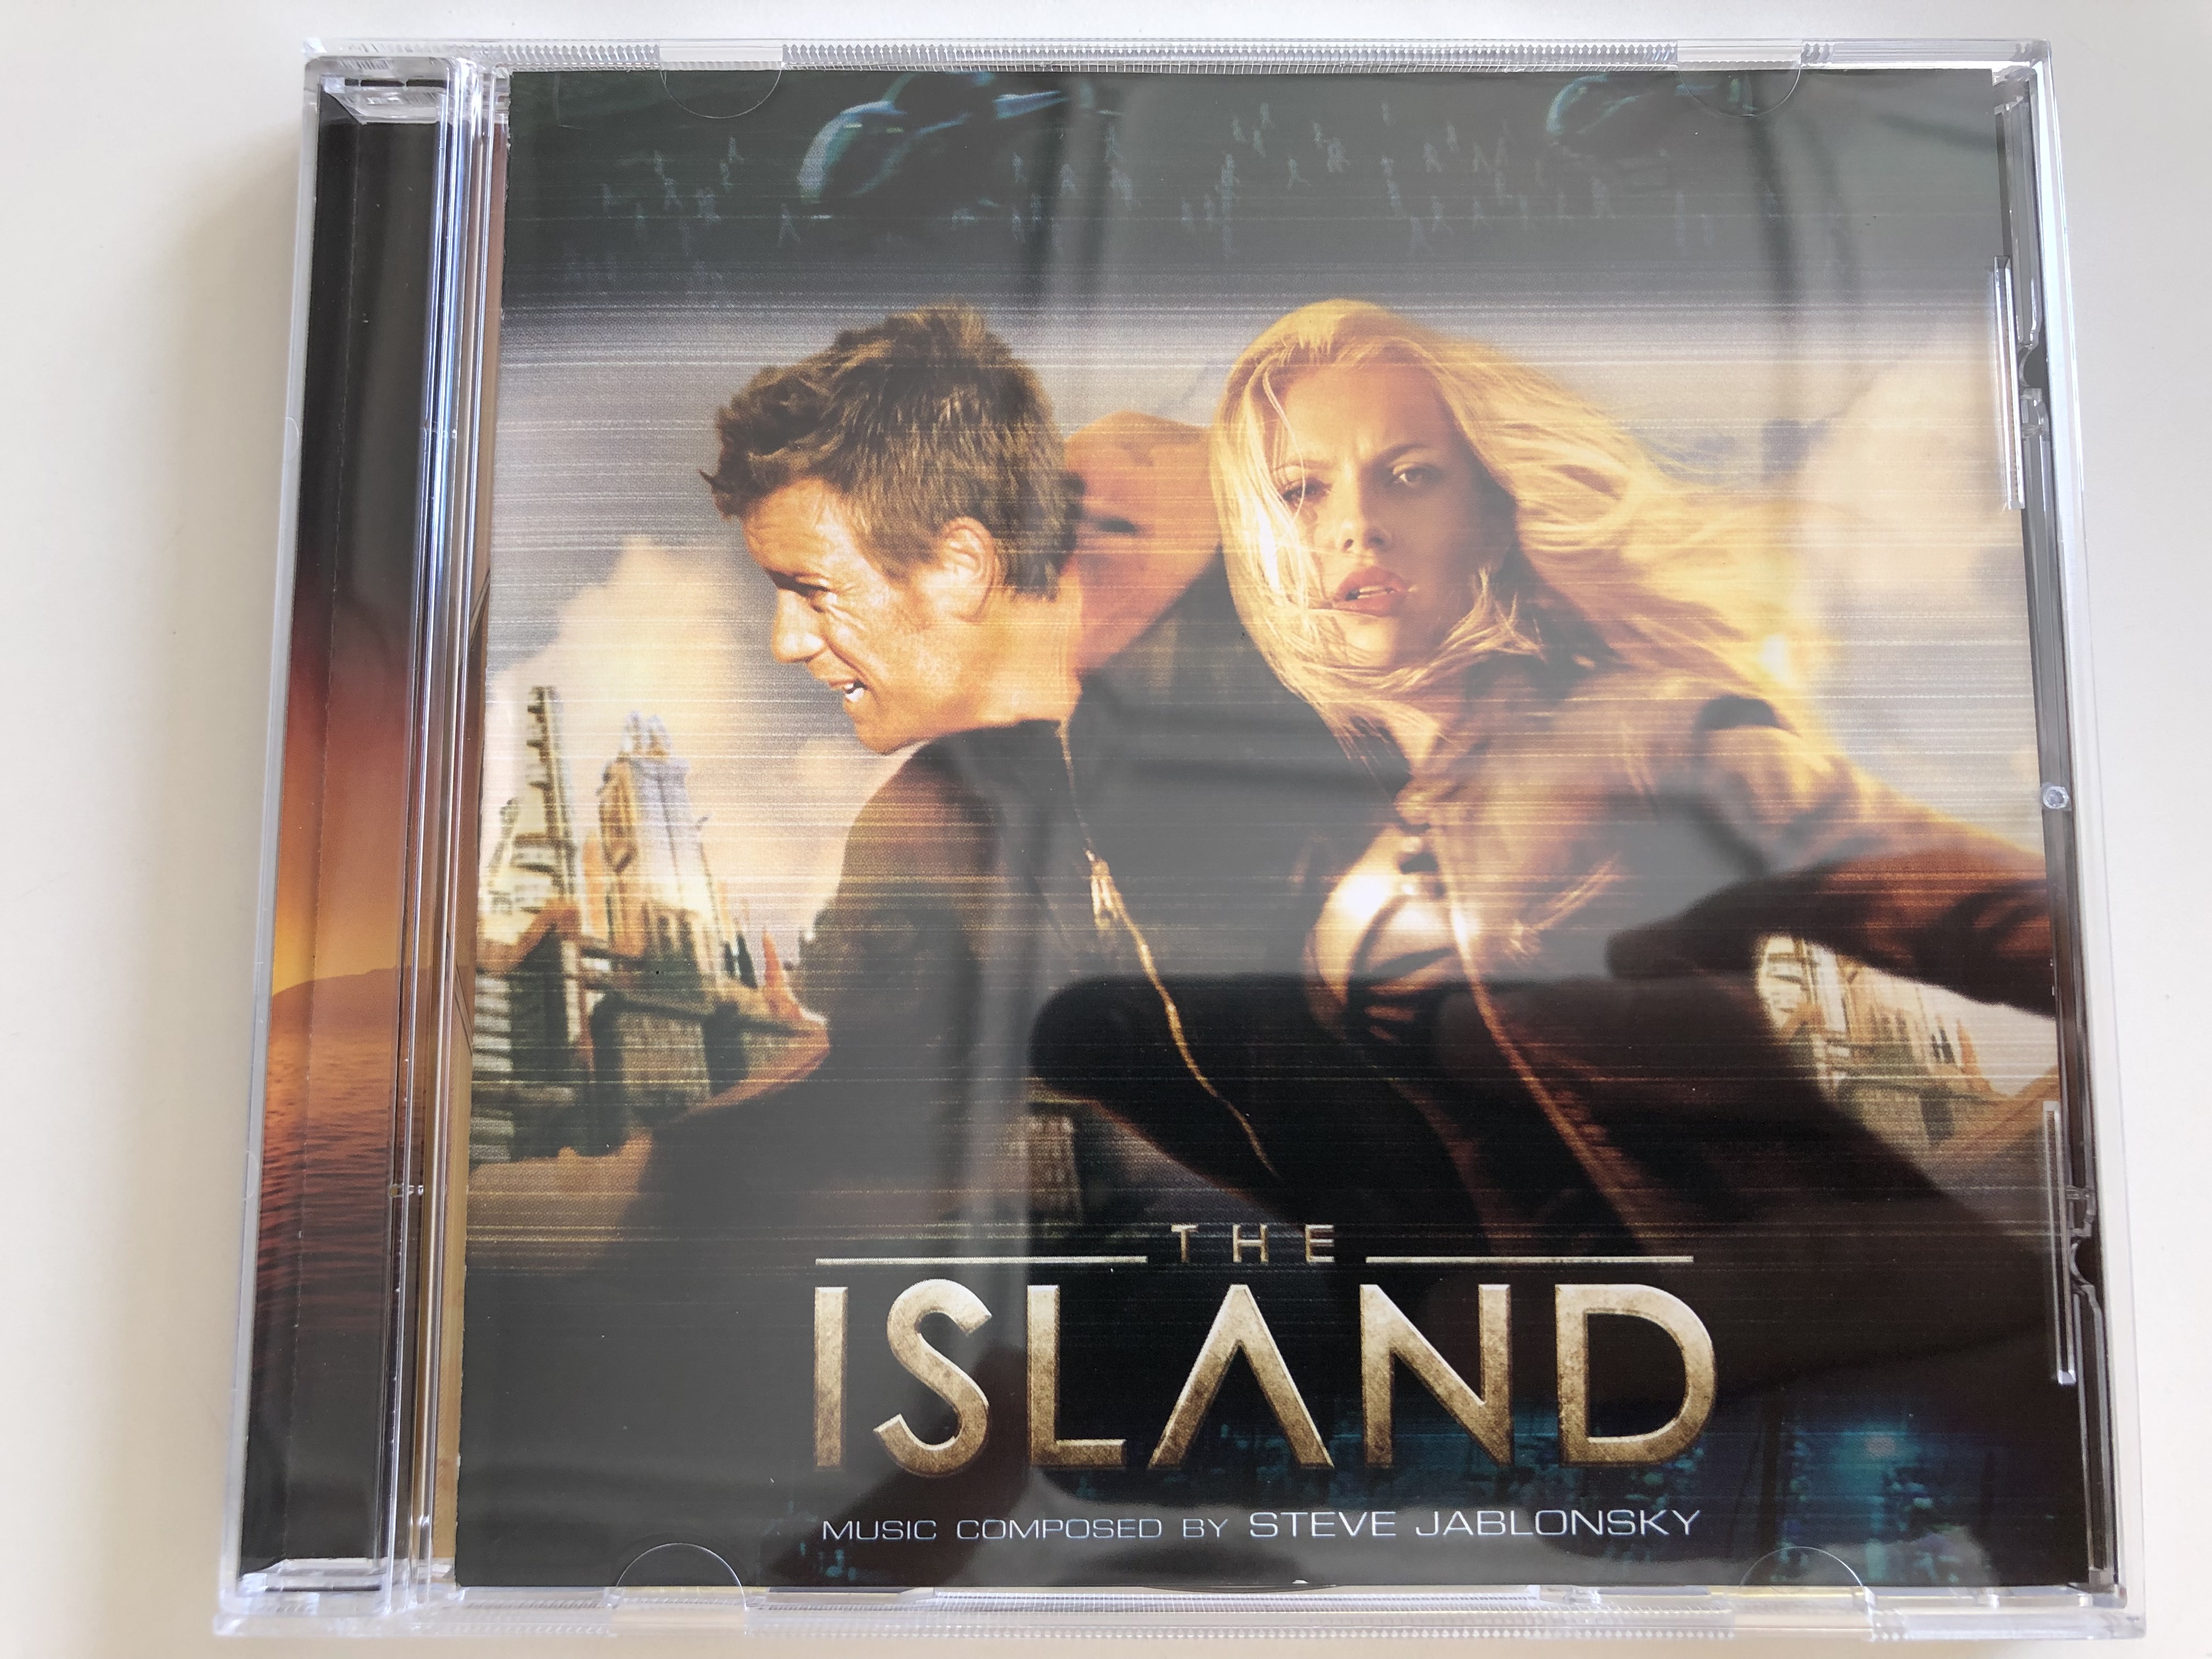 the-island-music-composed-by-steve-jablonsky-audio-cd-2005-motion-picture-soundtrack-1-.jpg